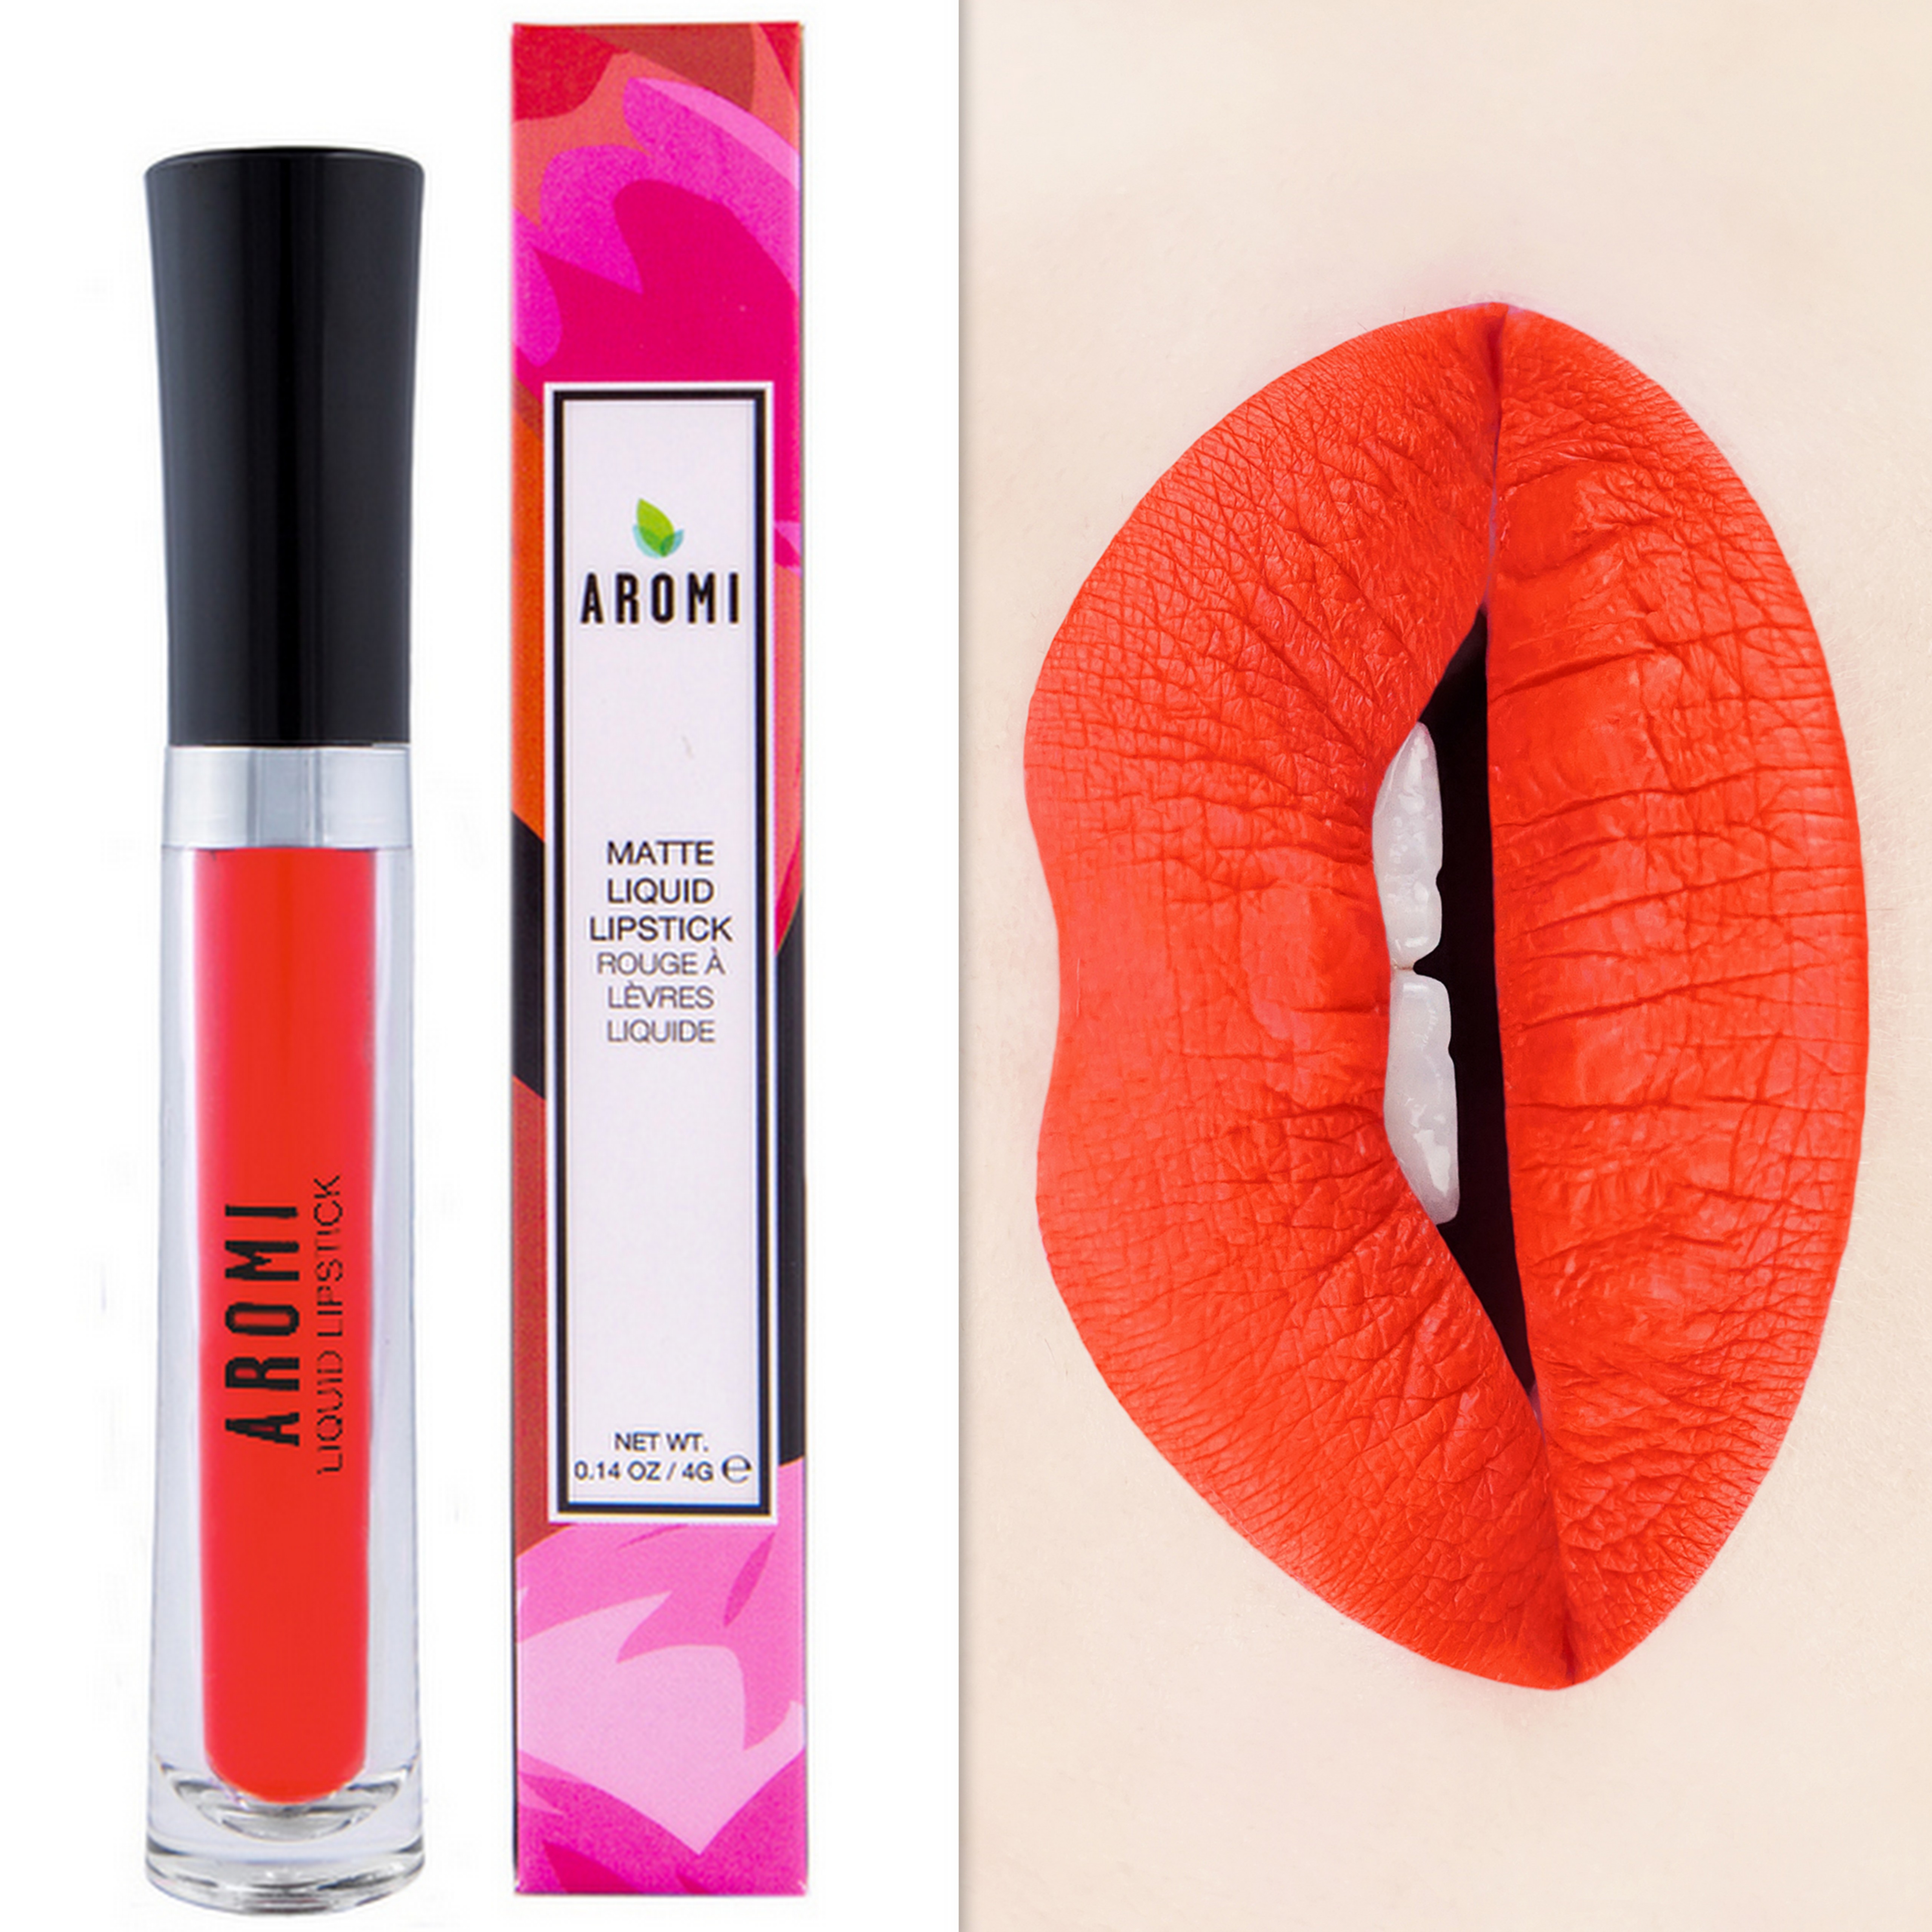 Two New Liquid To Matte Lipstick Shades Vibrant Orange And Cherry Red